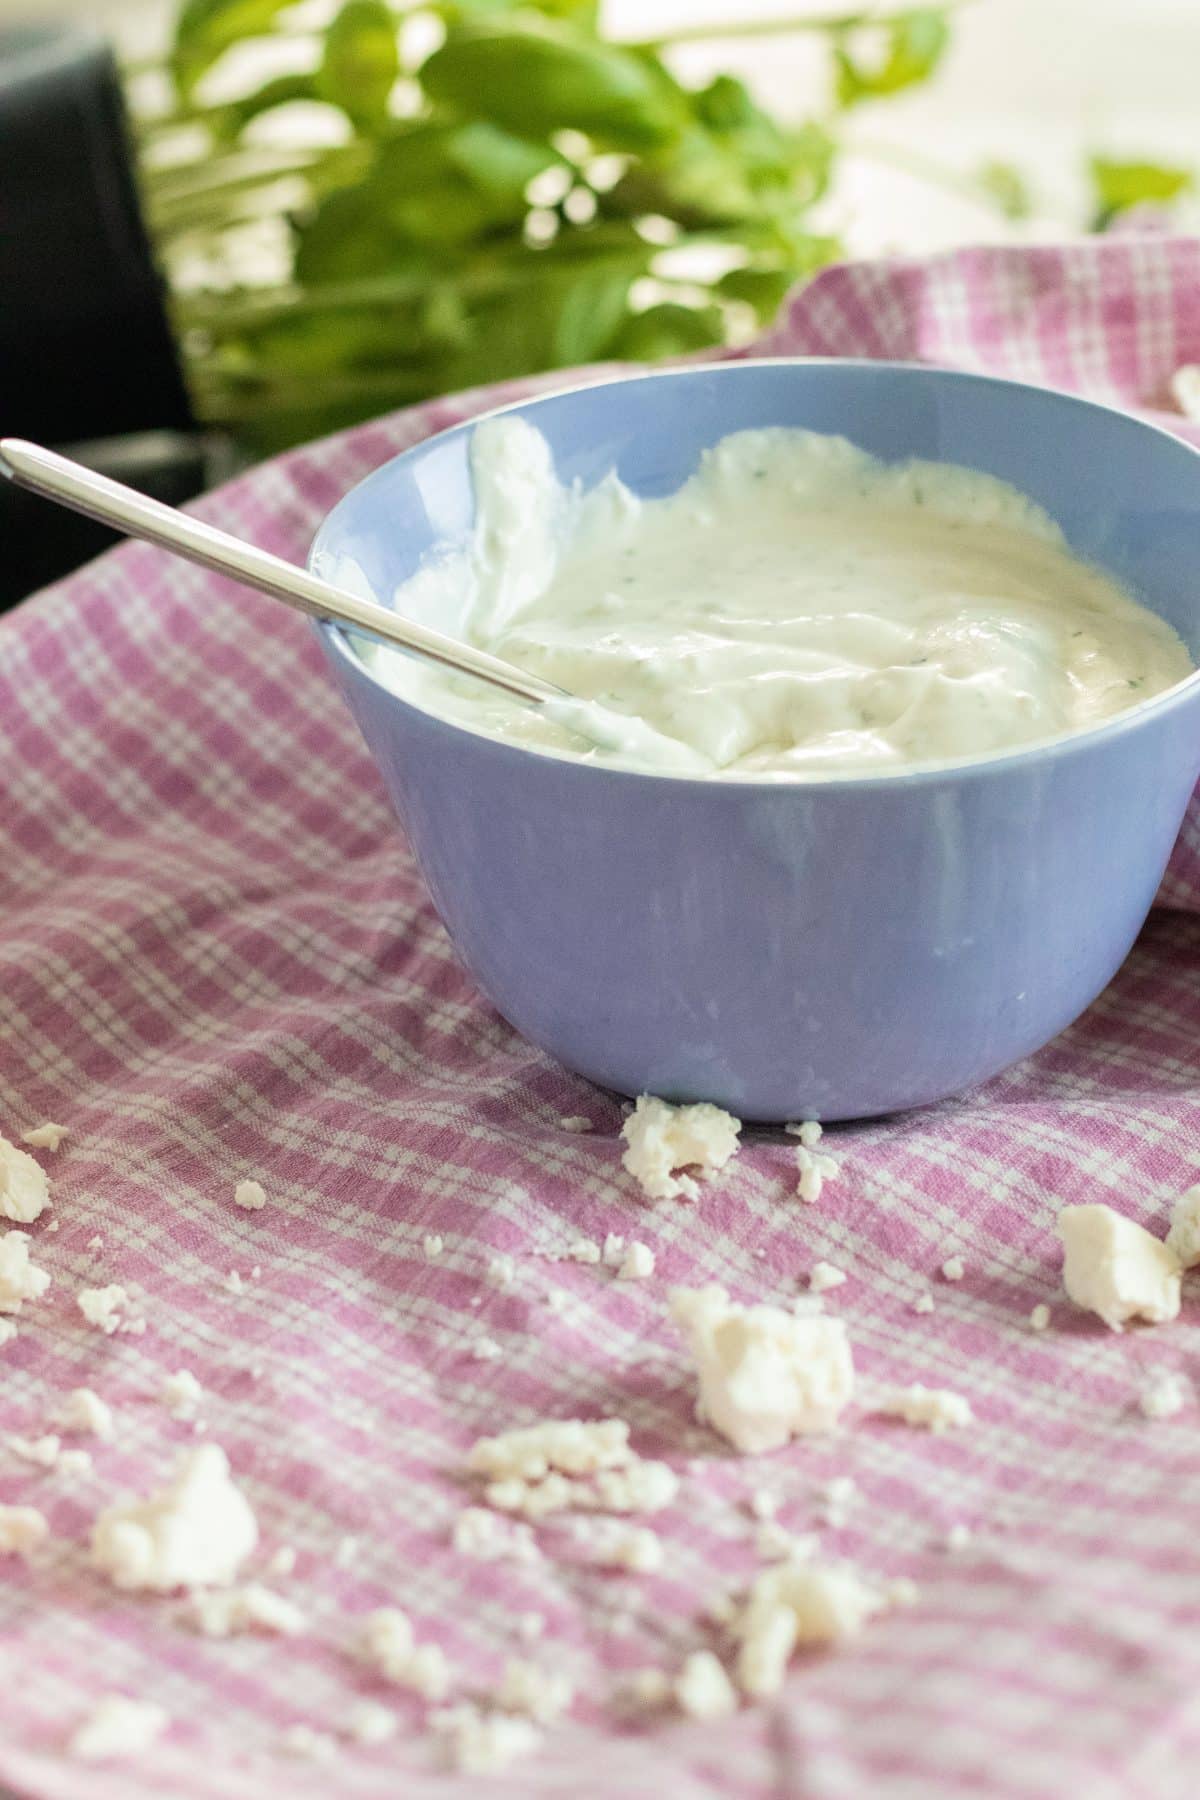 a bowl of whipped feta cheese with a spoon in front of crumbled feta cheese on a kitchen towel